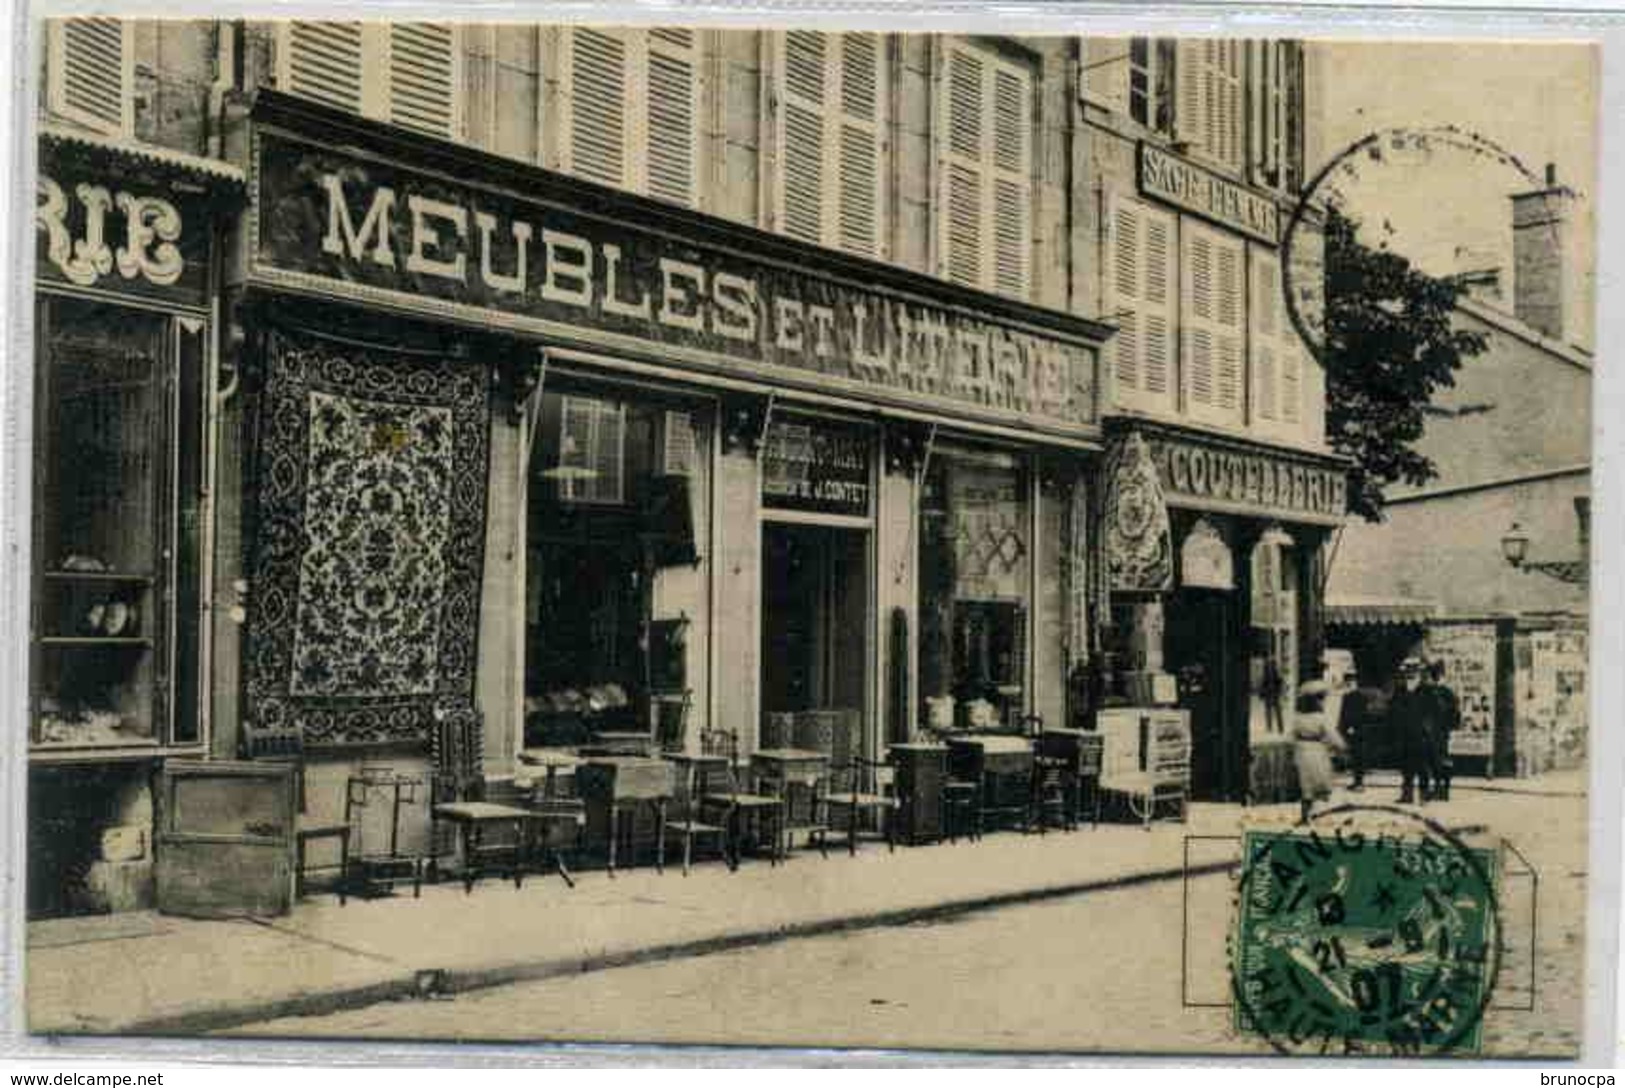 LANGRES MAGASINS Prudent May, Meubles Literie  COUTELLERIE - Langres